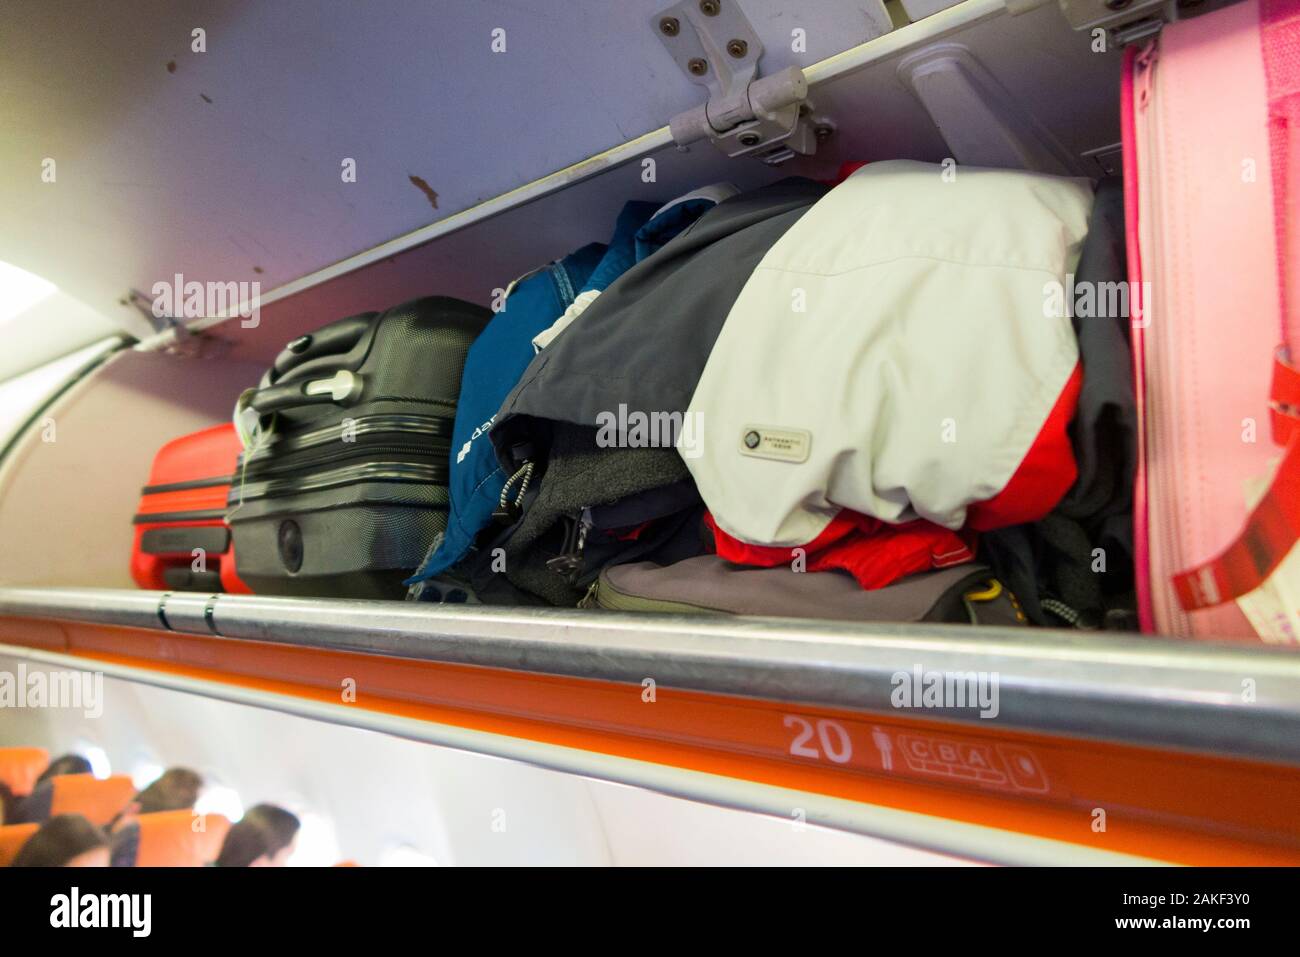 Overhead passenger locker / lockers / compartment / compartments for stowing passengers bags cabin luggage on an Easyjet Airbus A320 or  A319 plane. (105) Stock Photo